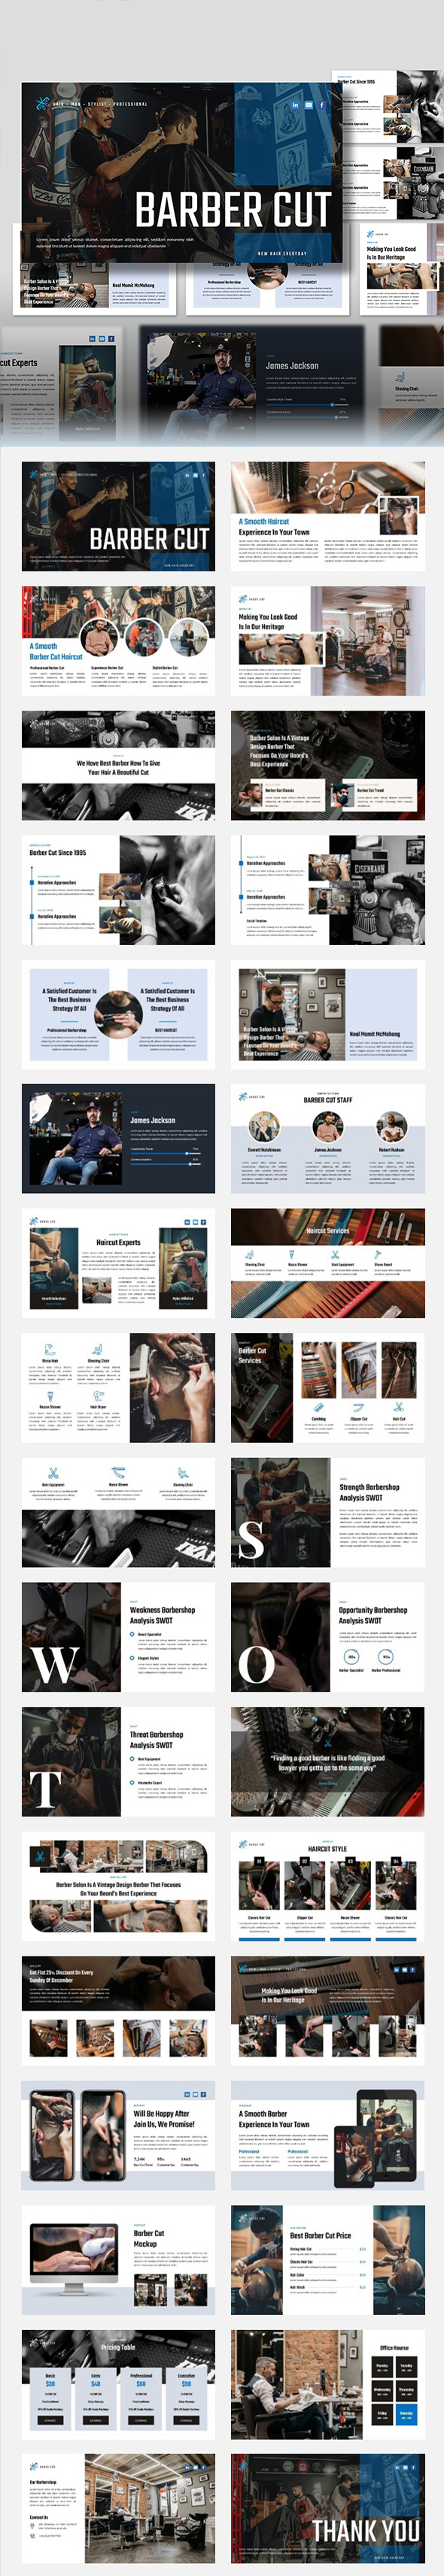 [DOWNLOAD]Barber Cut - Barbershop and Hair Salon PowerPoint Template